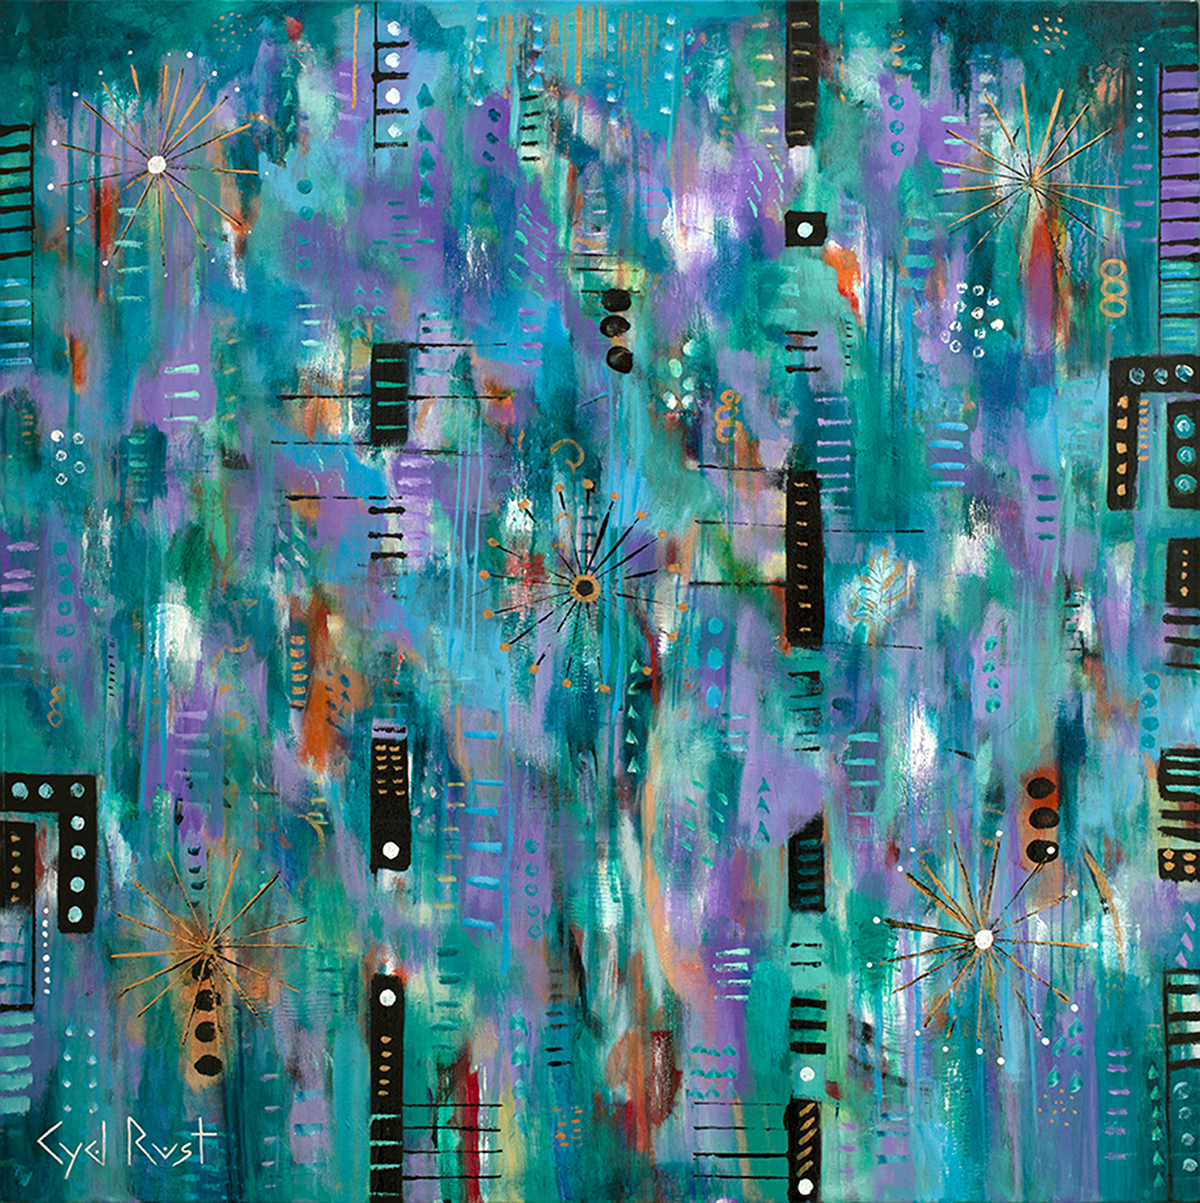 SEEING SPOTS ©Cyd Rust: A 36" x 36" Acrylic Painting on Gallery Wrapped Canvas